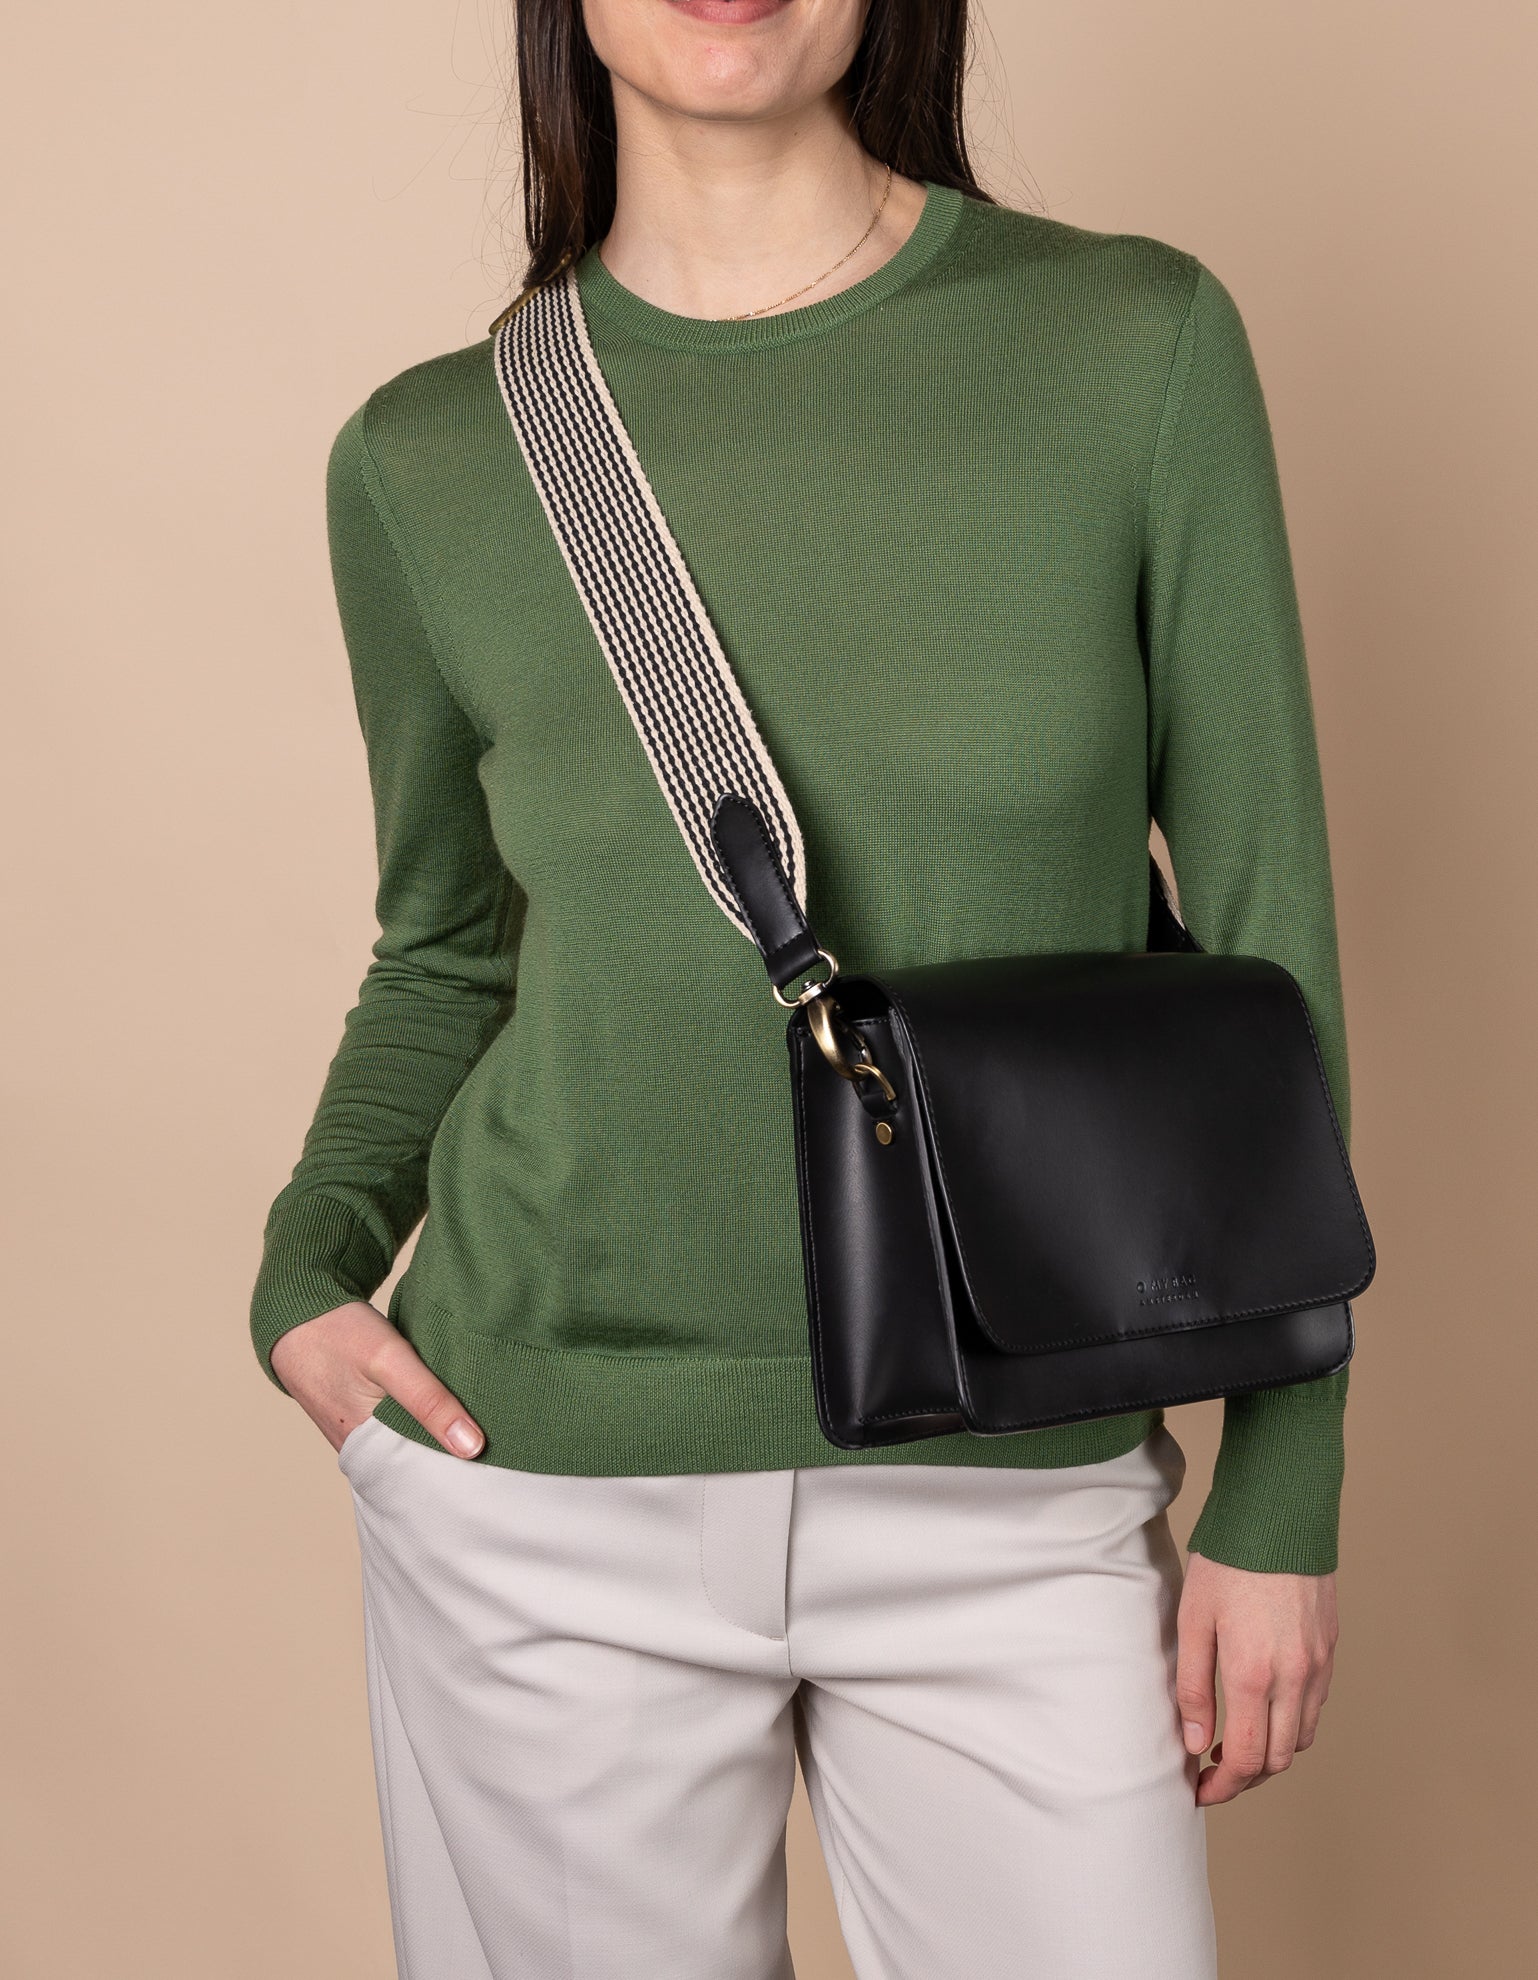 Model wearing brown crossbody bag with black and white strap